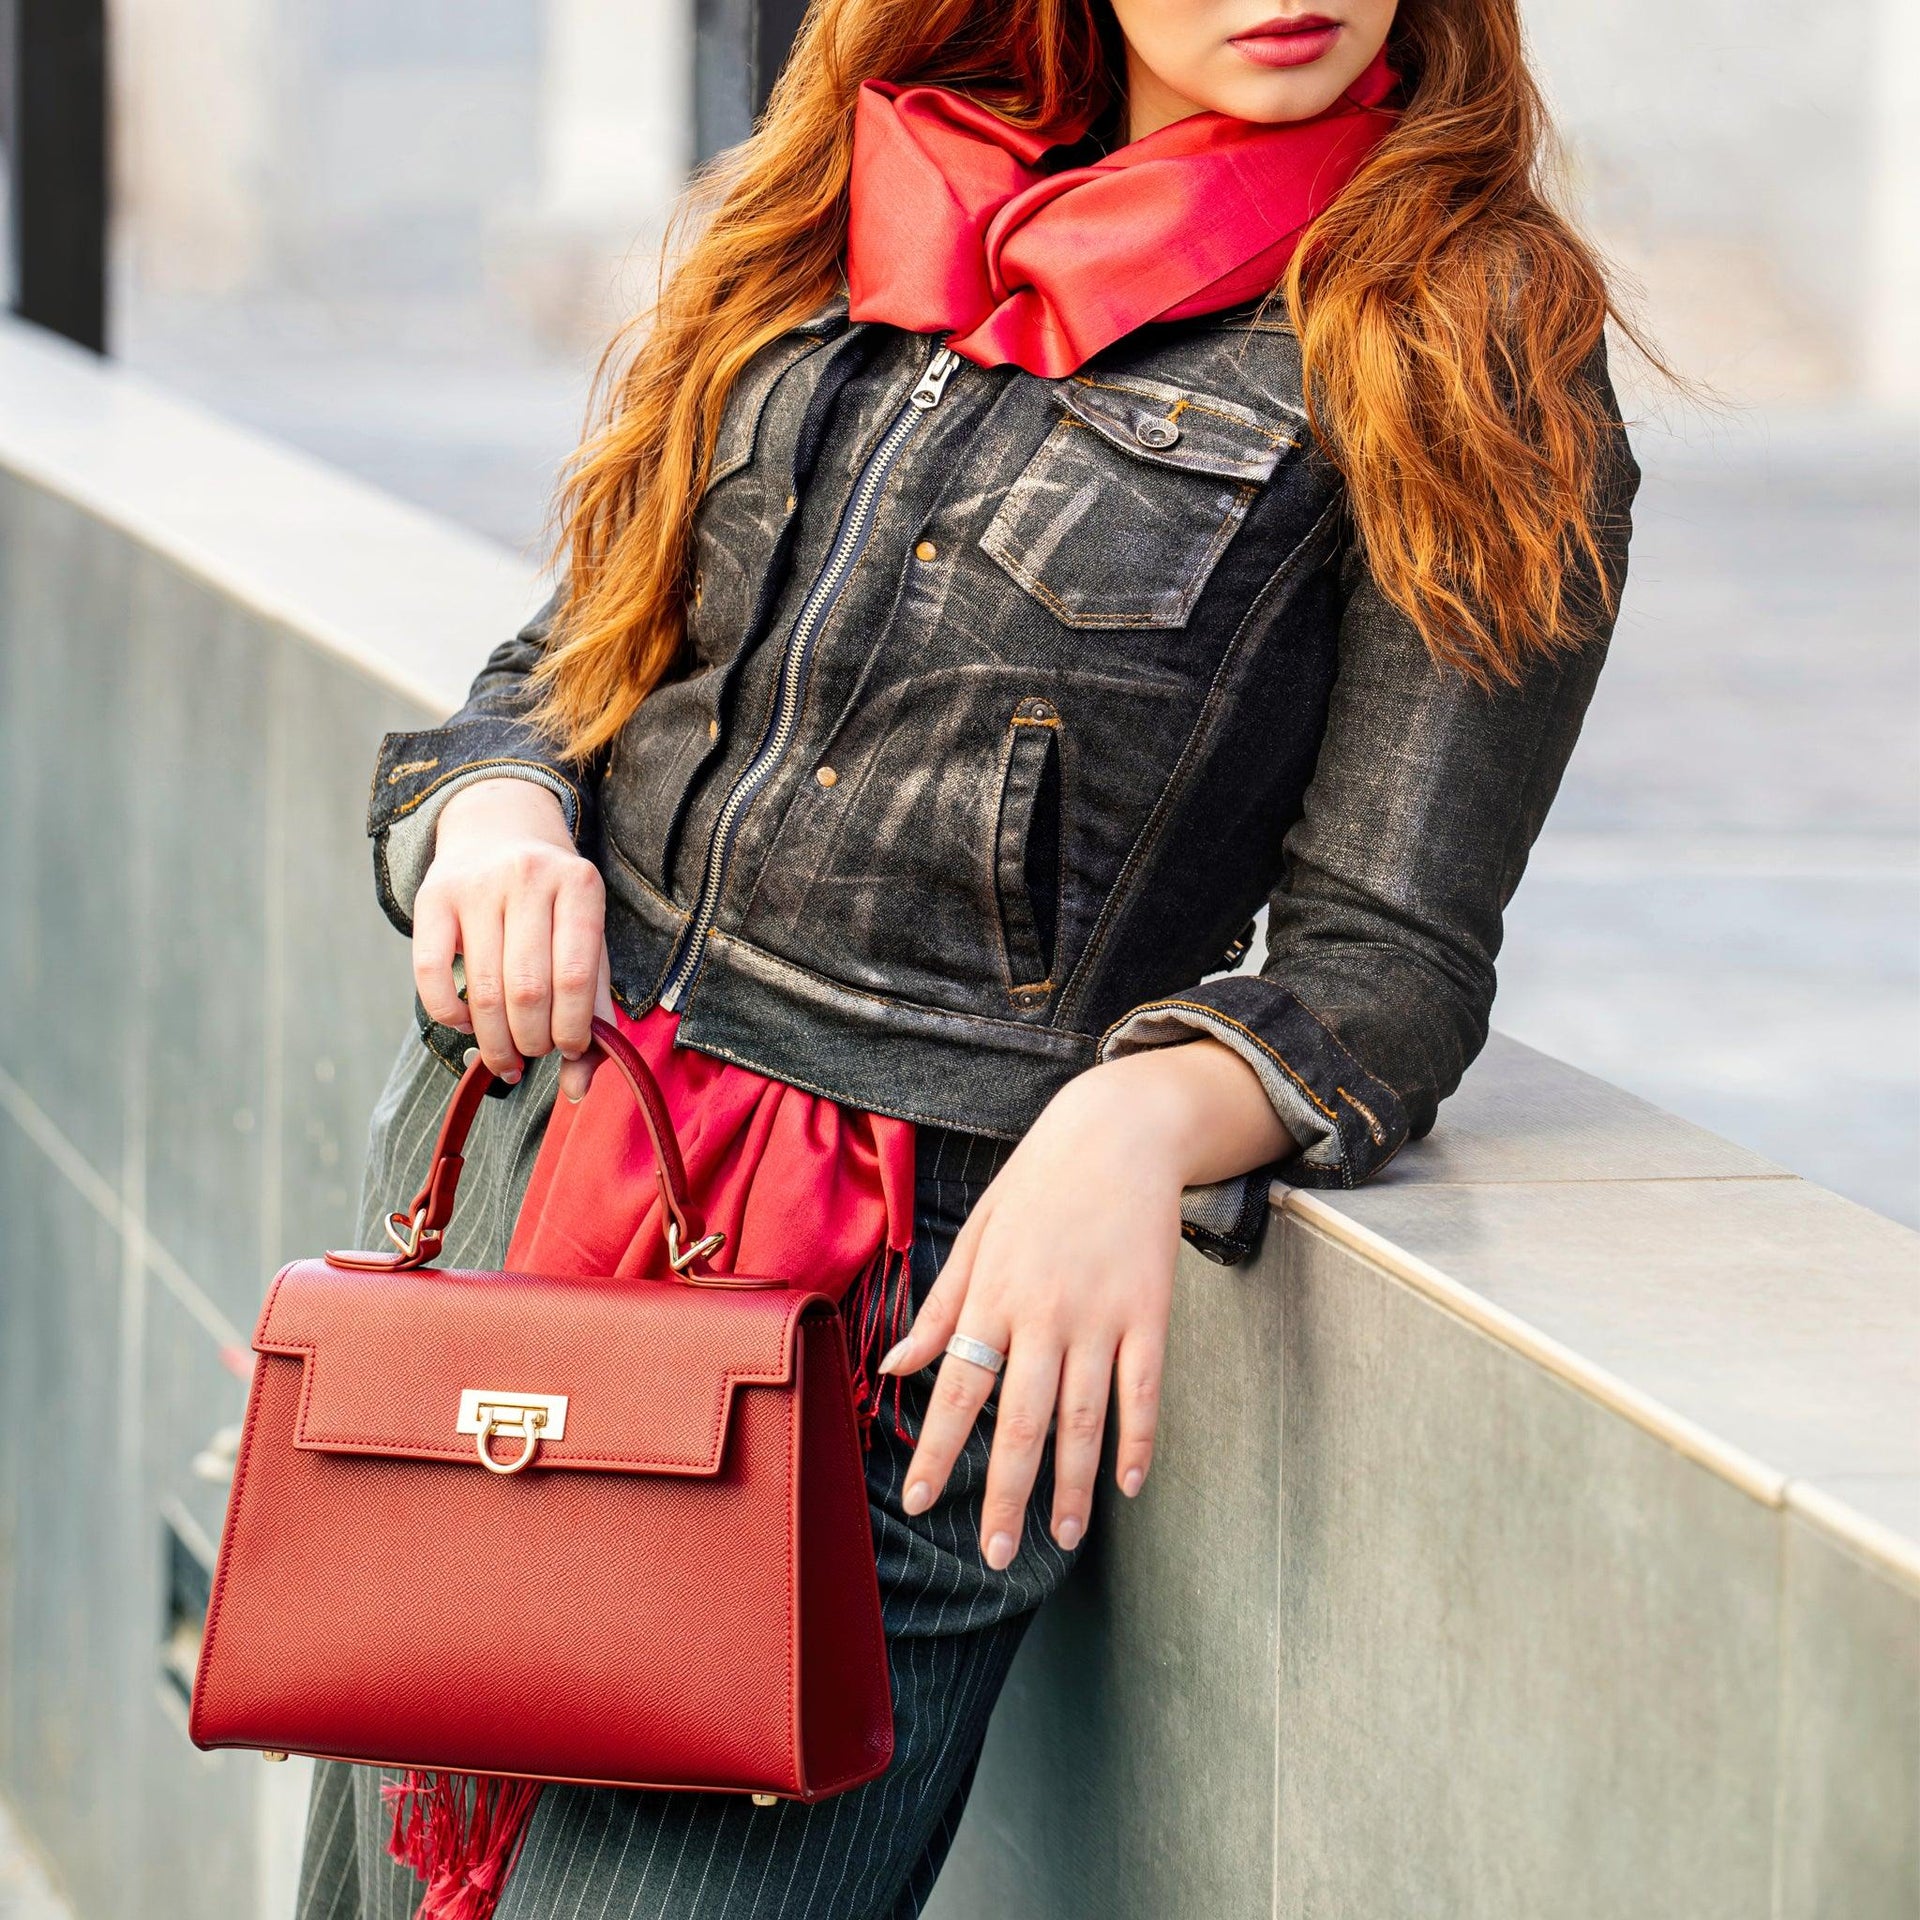 20 Red Bag Outfit Ideas - all black with jeans an a pop of color with a red  statement bag - April Golightly | Red bag outfit, Red purse outfit, Red  outfit